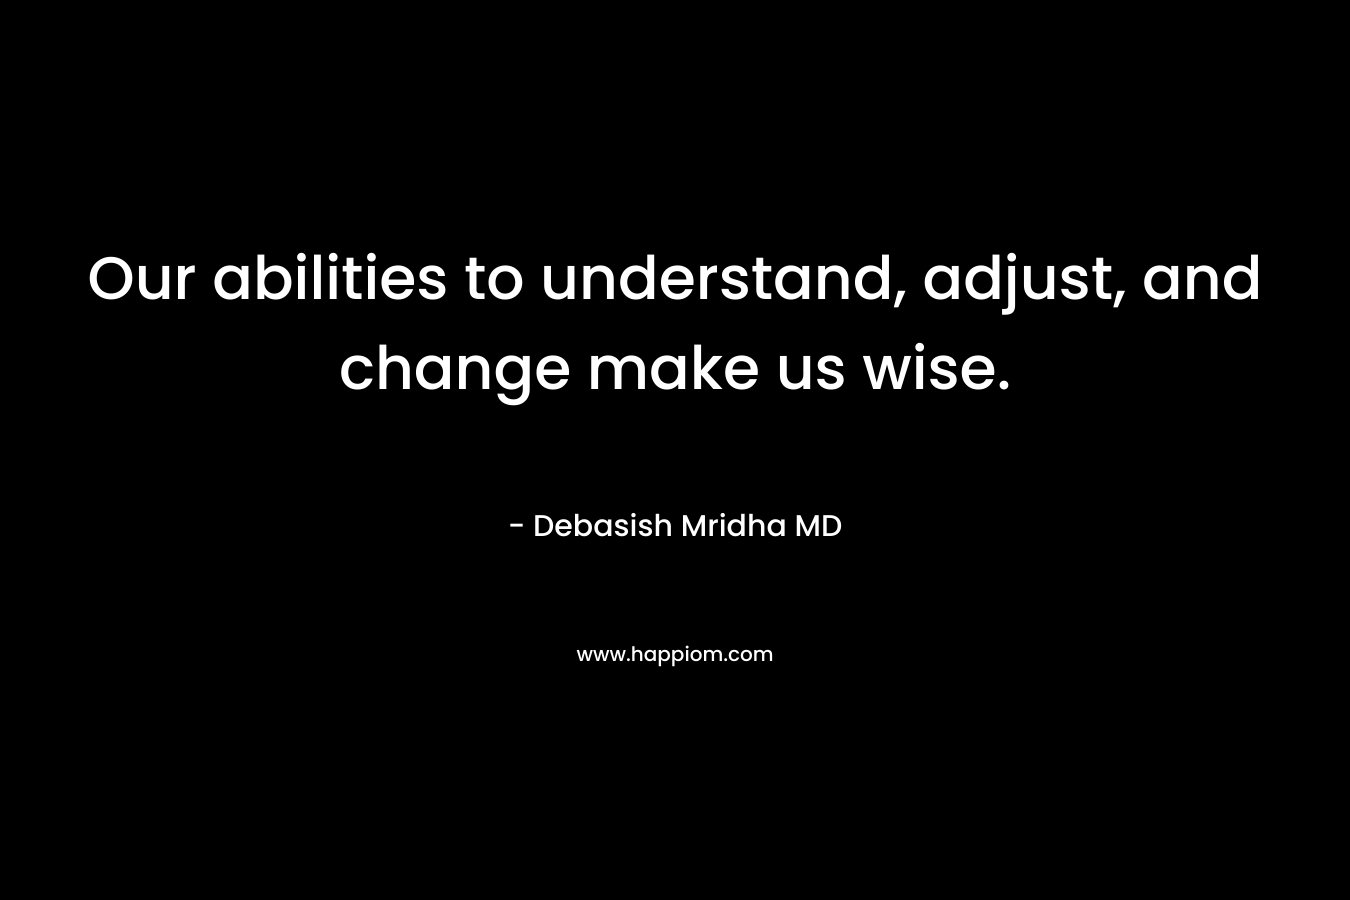 Our abilities to understand, adjust, and change make us wise. – Debasish Mridha MD